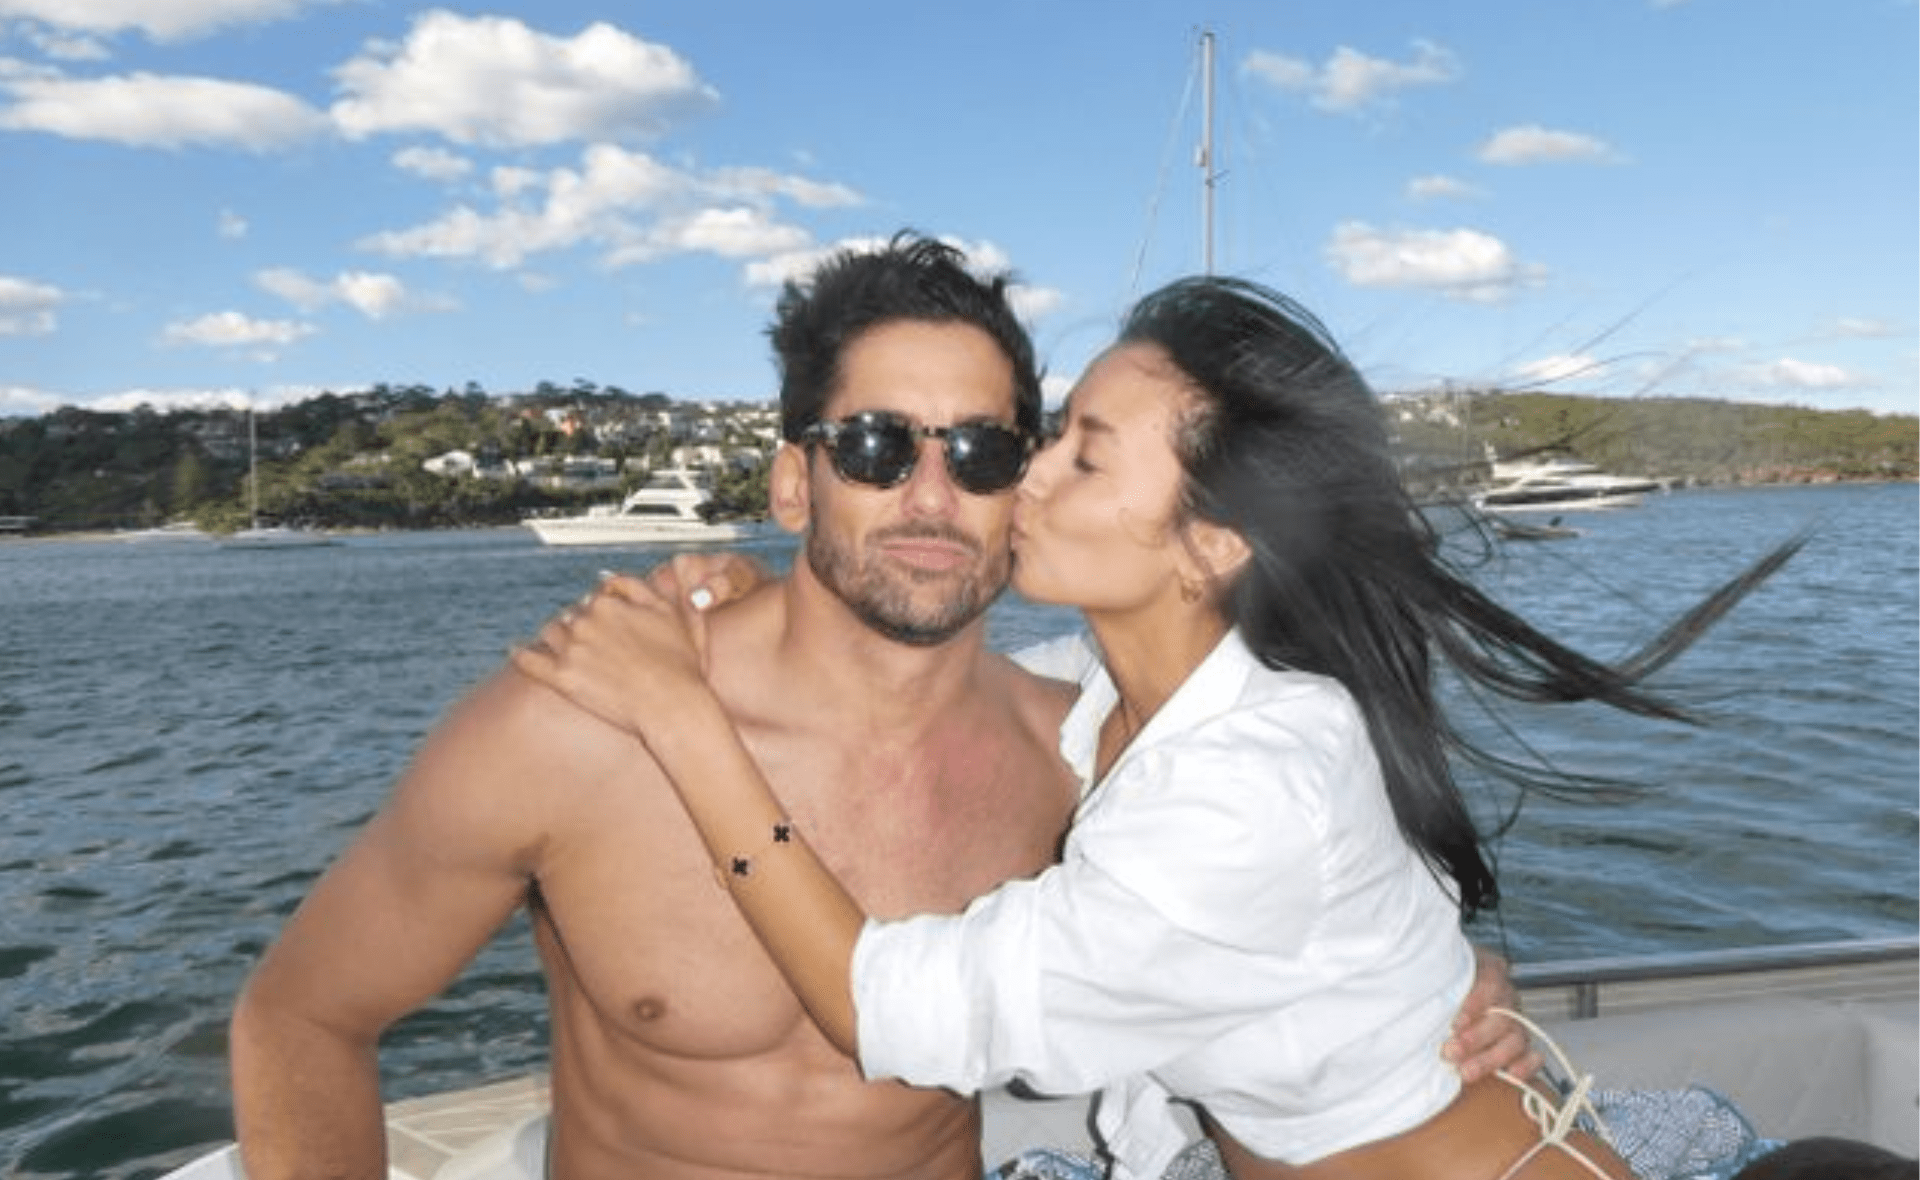 Duncan and Evelyn brought the MAFS couple swap to real life: This is their love story